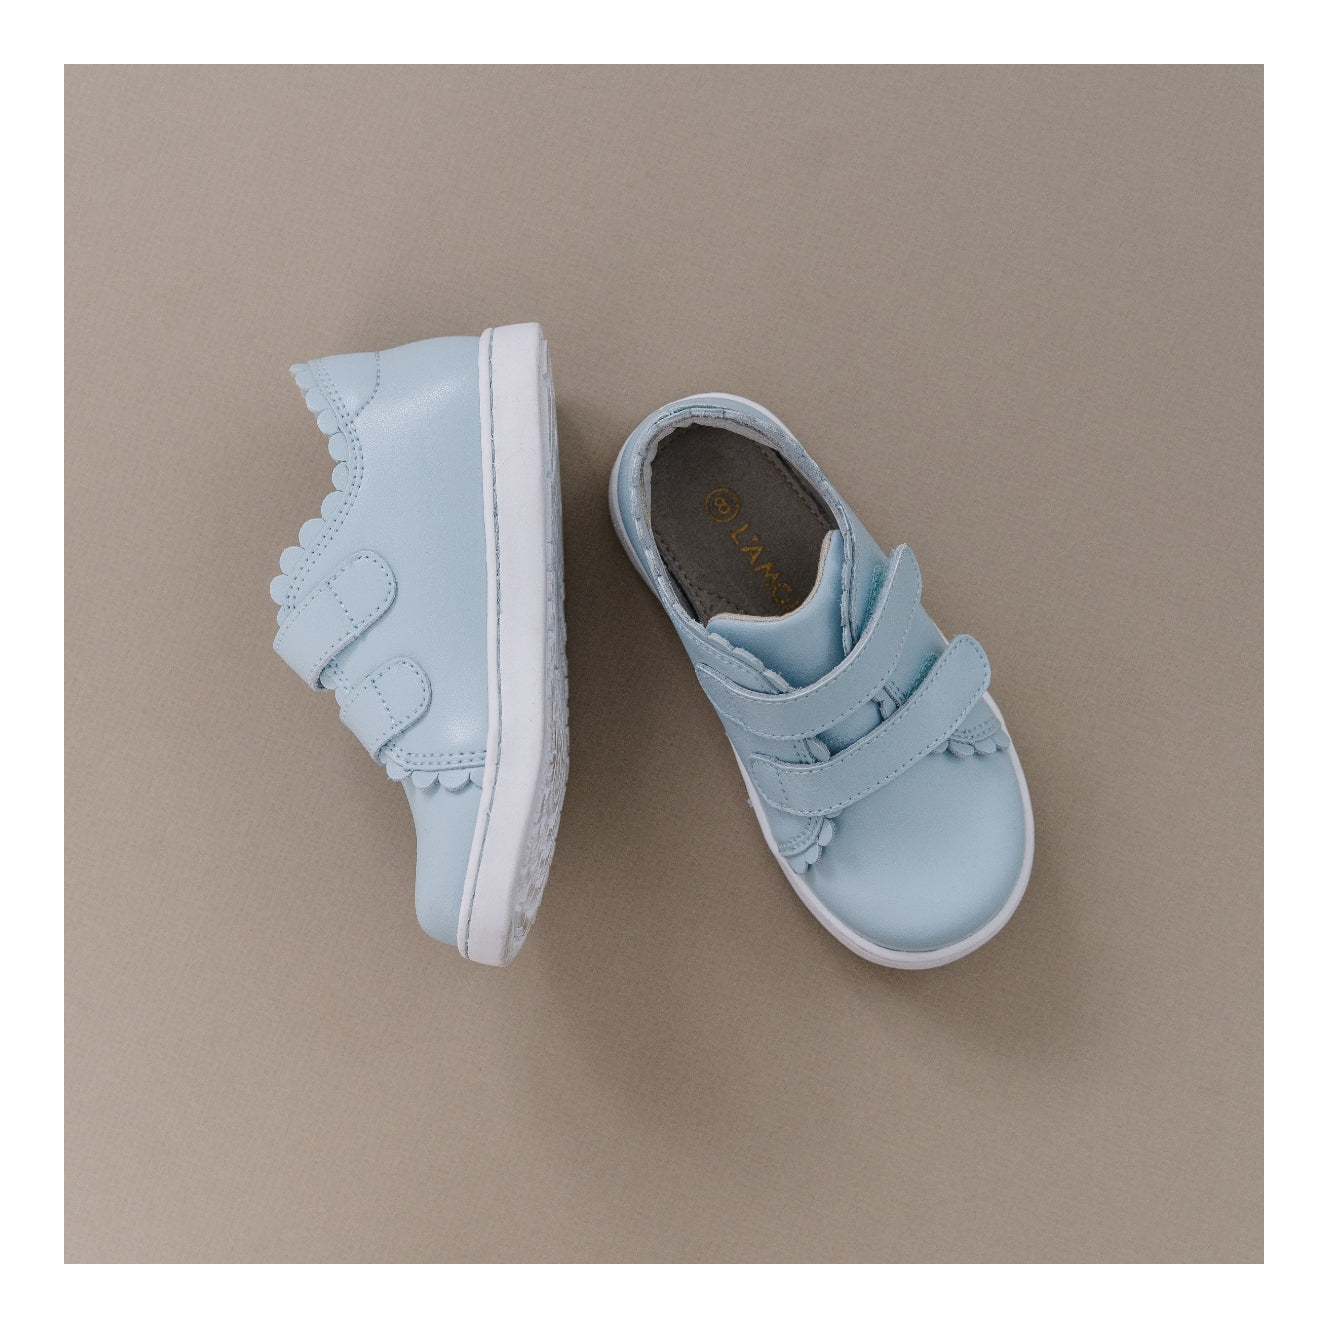 Where To Buy Cute Velcro Sneakers